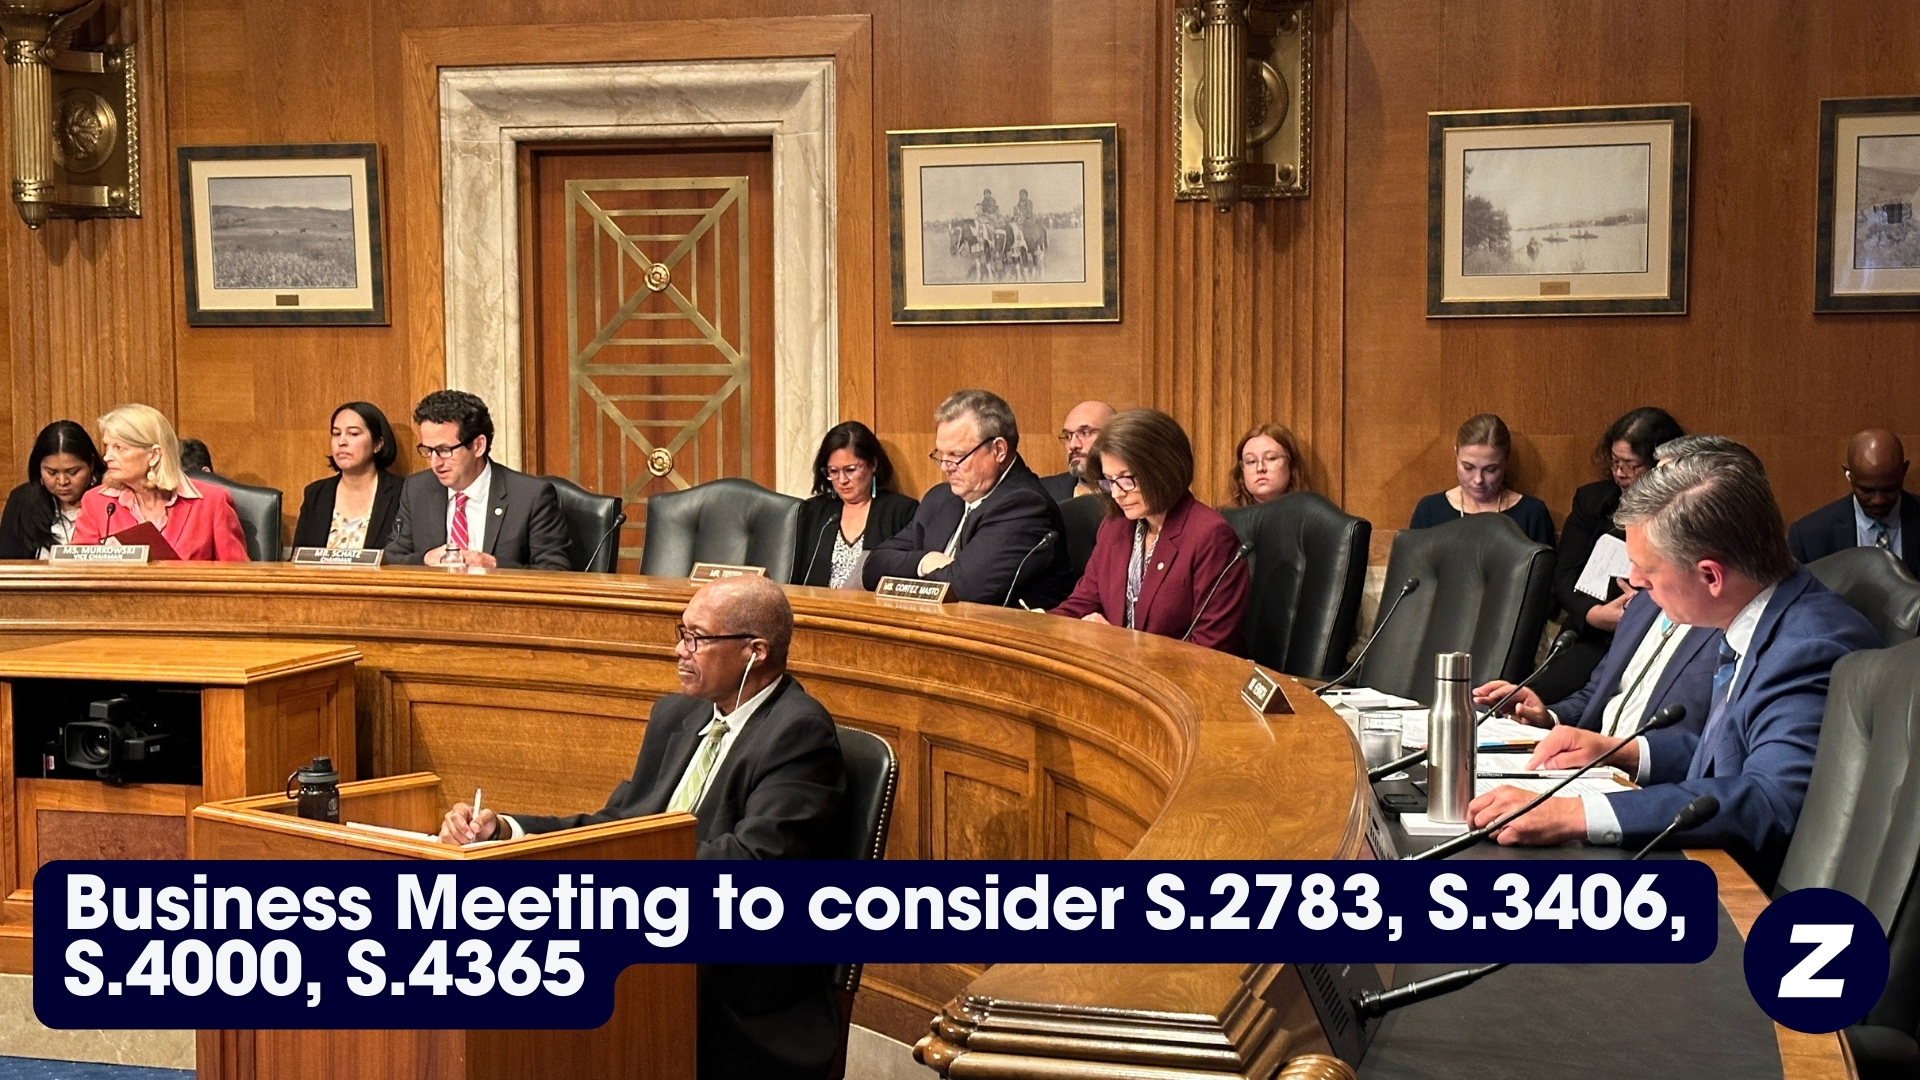 Business Meeting to consider S.2783, S.3406, S.4000, S.4365